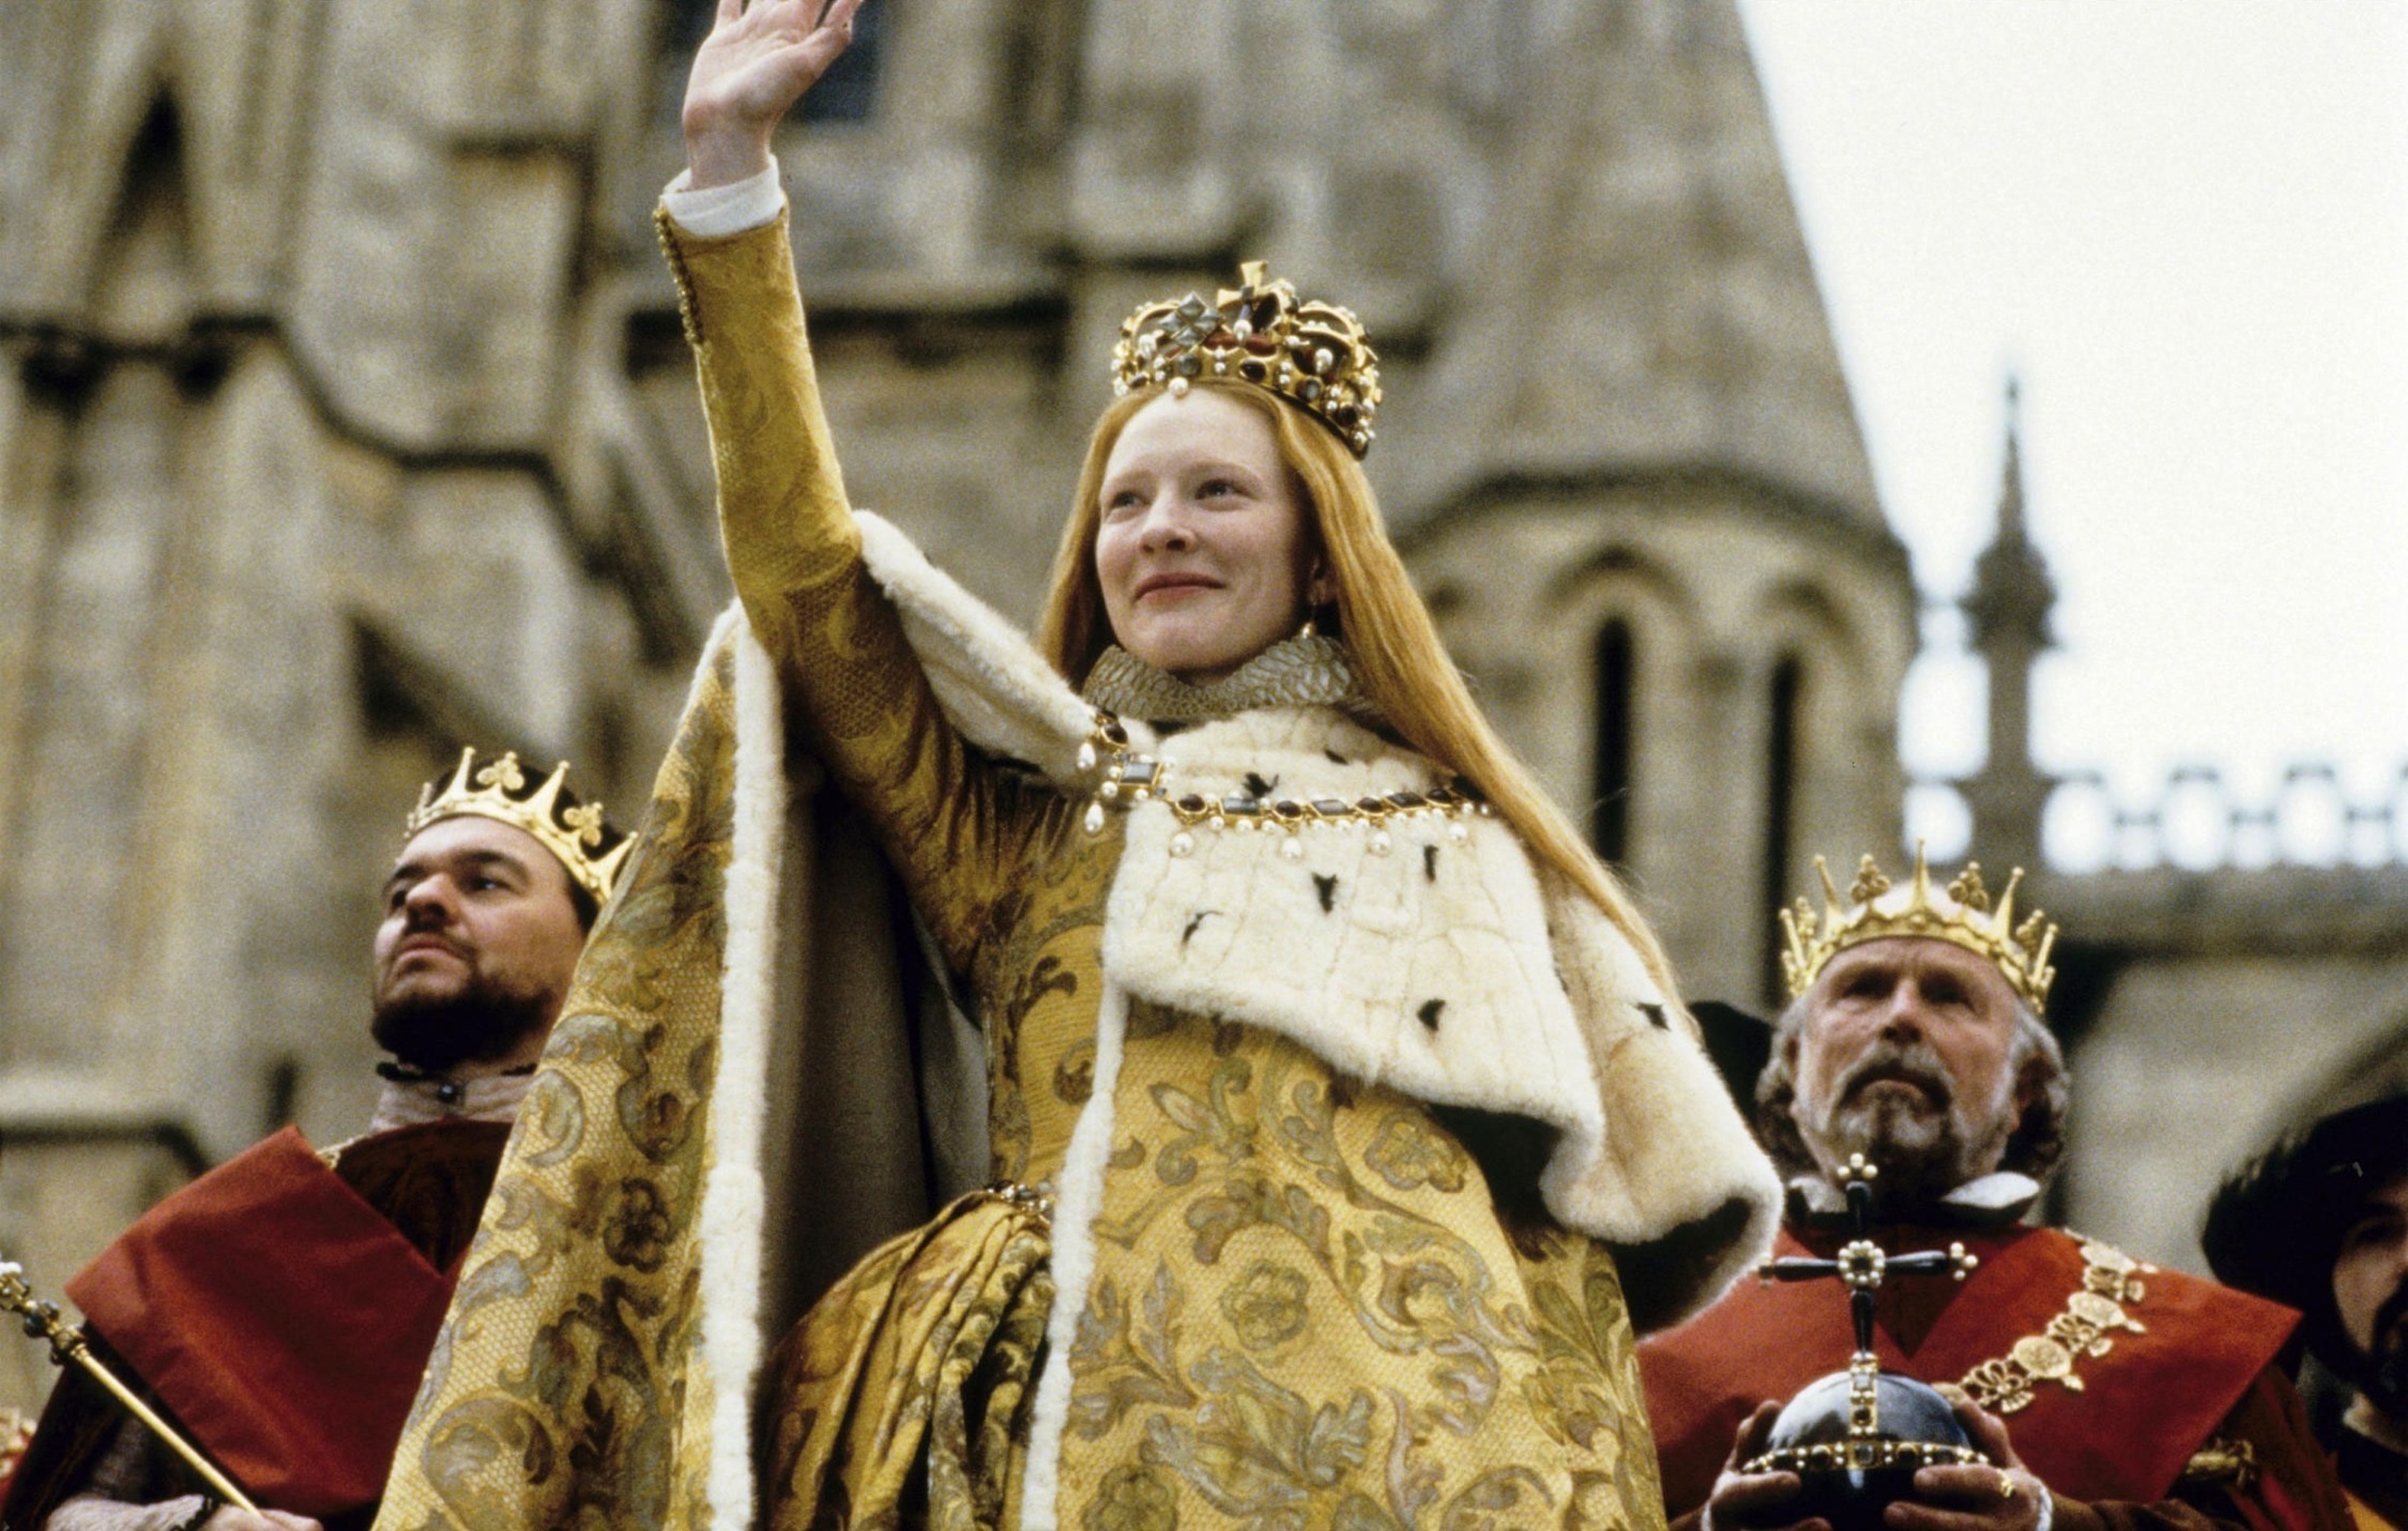 <p>Cate Blanchett is considered one of the best actors of her generation, and it all began with her breakout turn starring in <em>Elizabeth</em>. Now, this film is about Elizabeth I, not the monarch played by Helen Mirren roughly a decade later. This period piece earned Blanchett her first Oscar nomination but not her last.</p><p>You may also like: <a href='https://www.yardbarker.com/entertainment/articles/the_25_greatest_villain_names_of_all_time_040824/s1__35686598'>The 25 greatest villain names of all time</a></p>